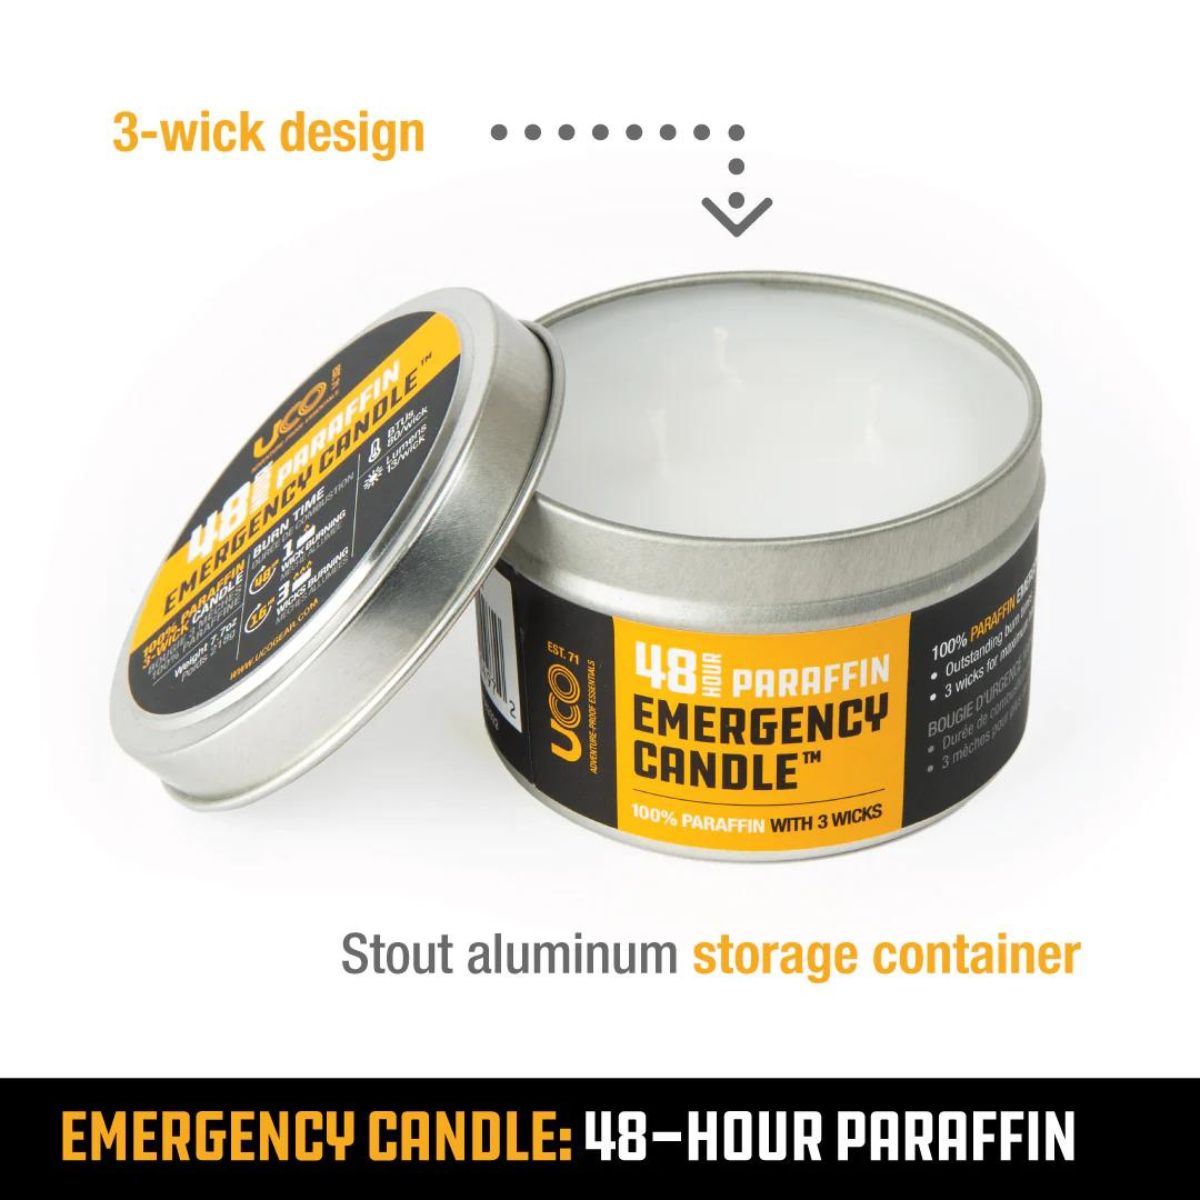 48-Hour Emergency Candle Paraffin